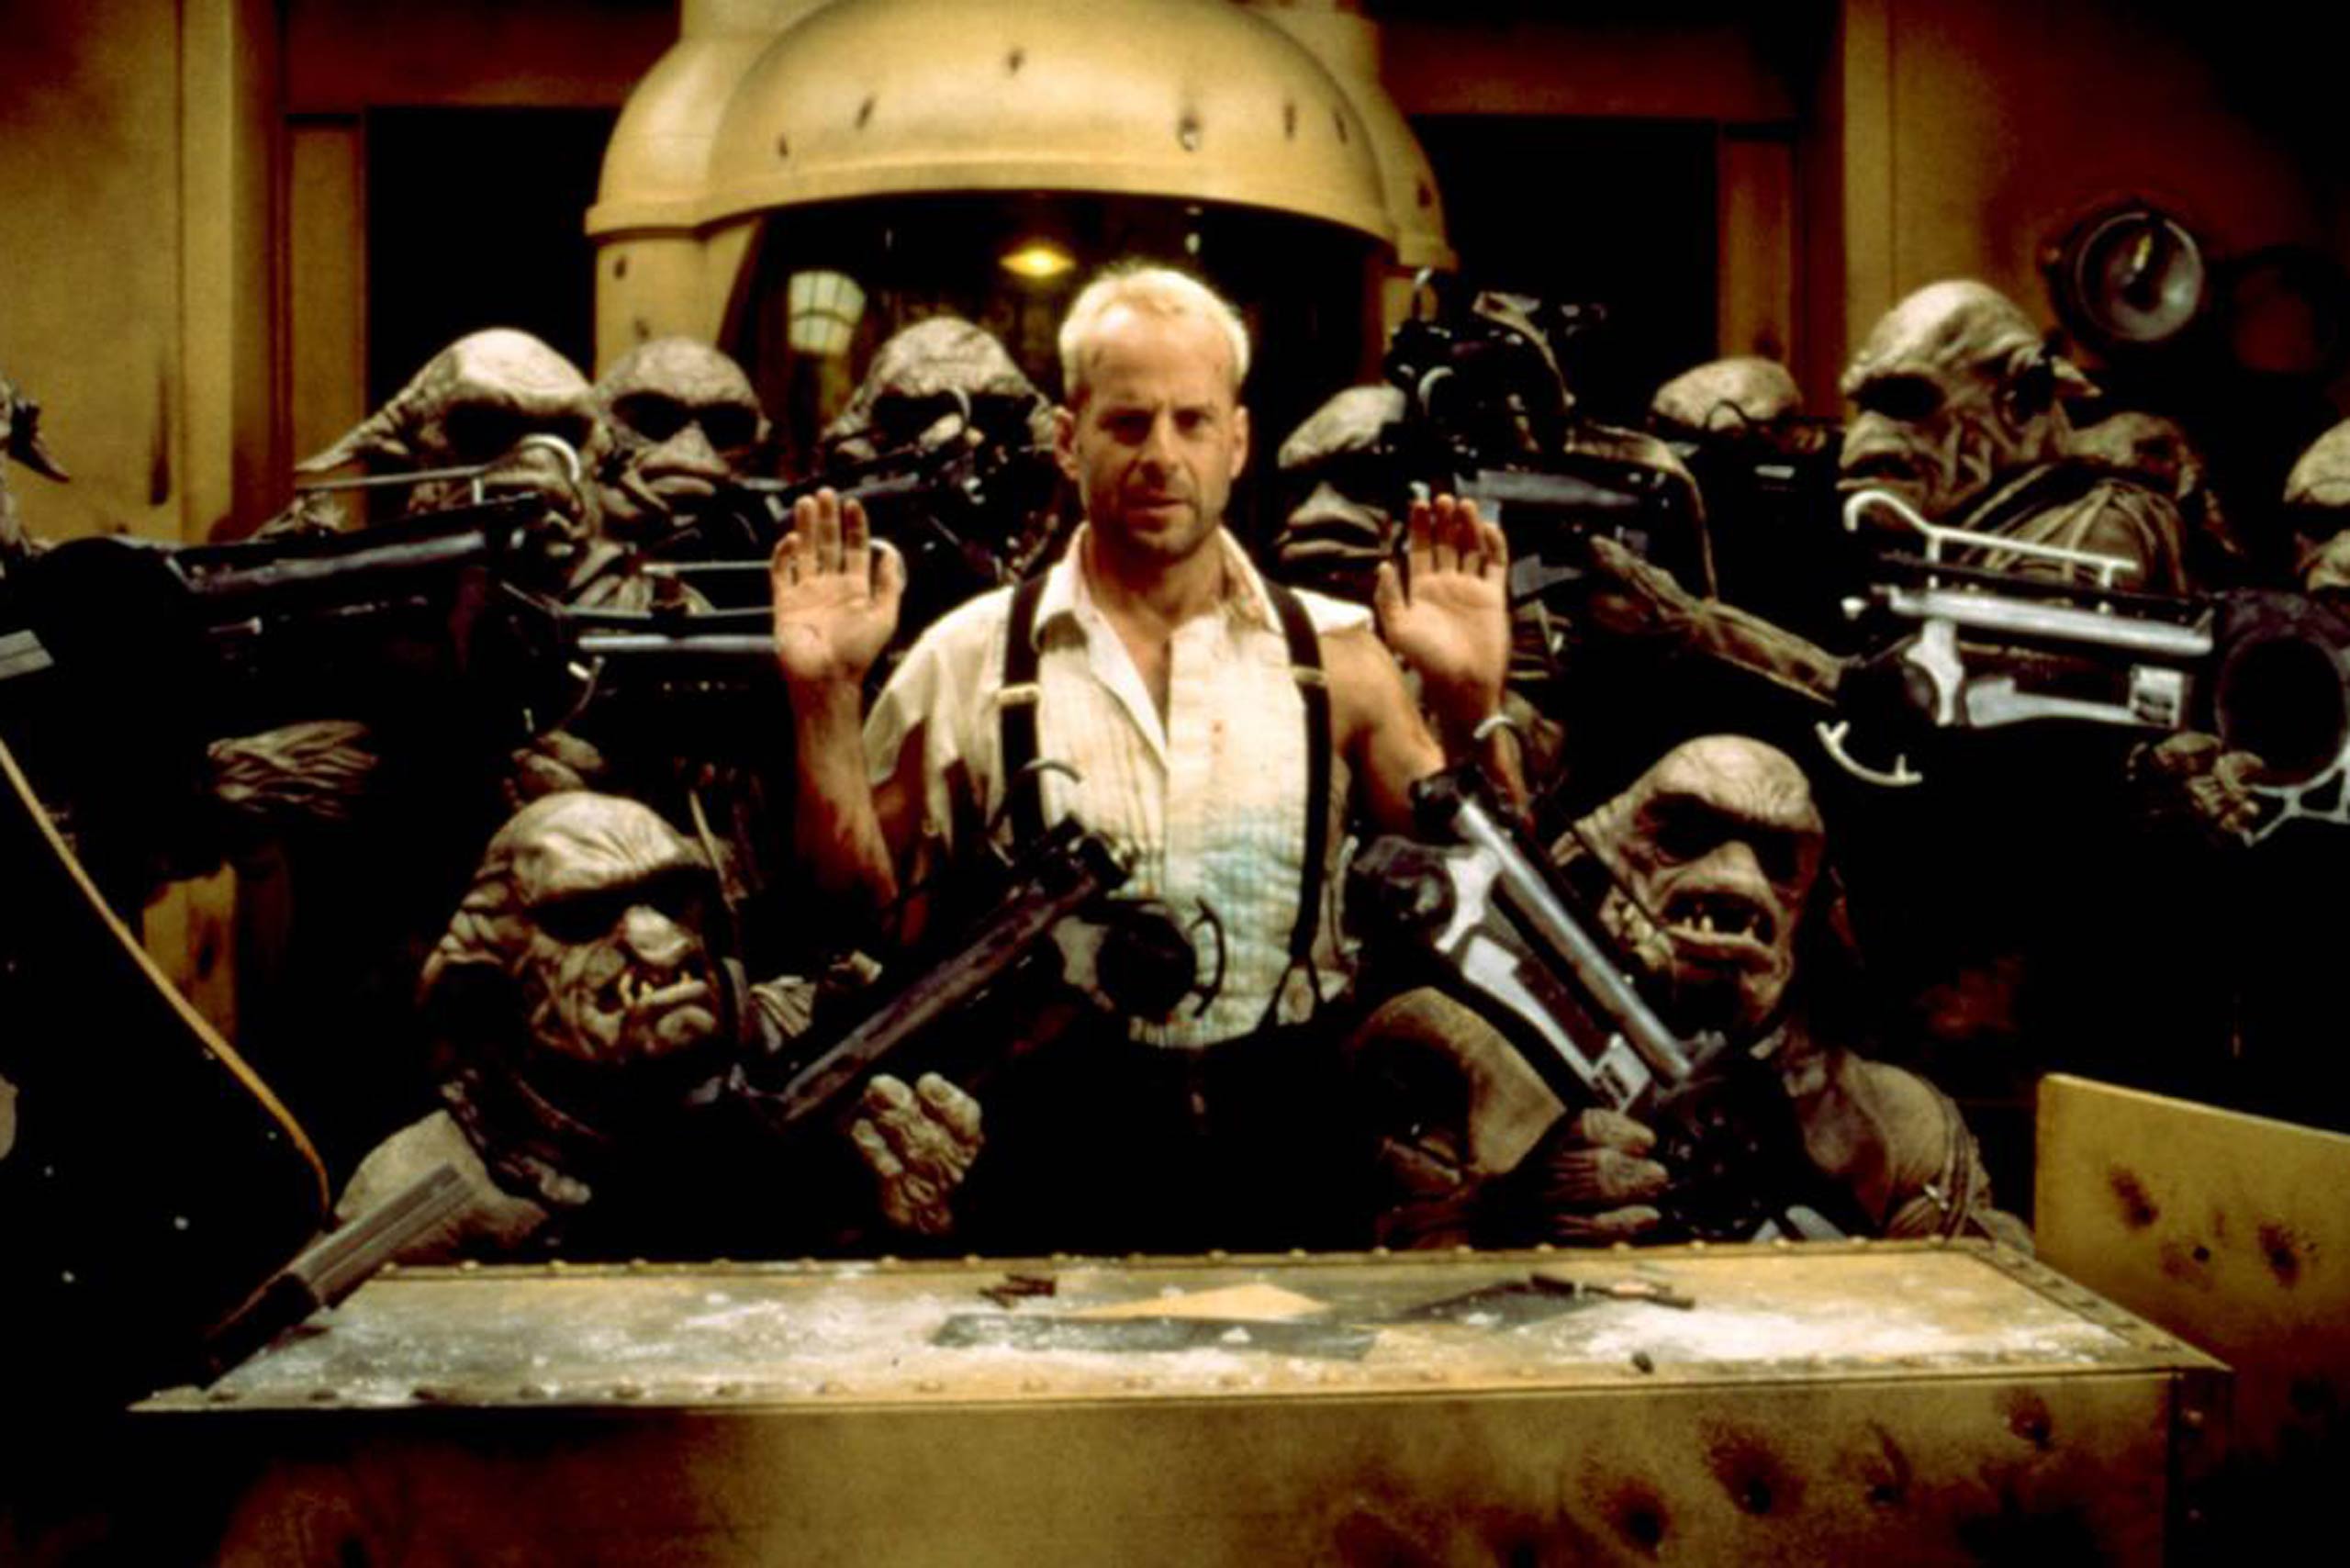 Bruce Willis as Korben Dallas in The Fifth Element, 1997.